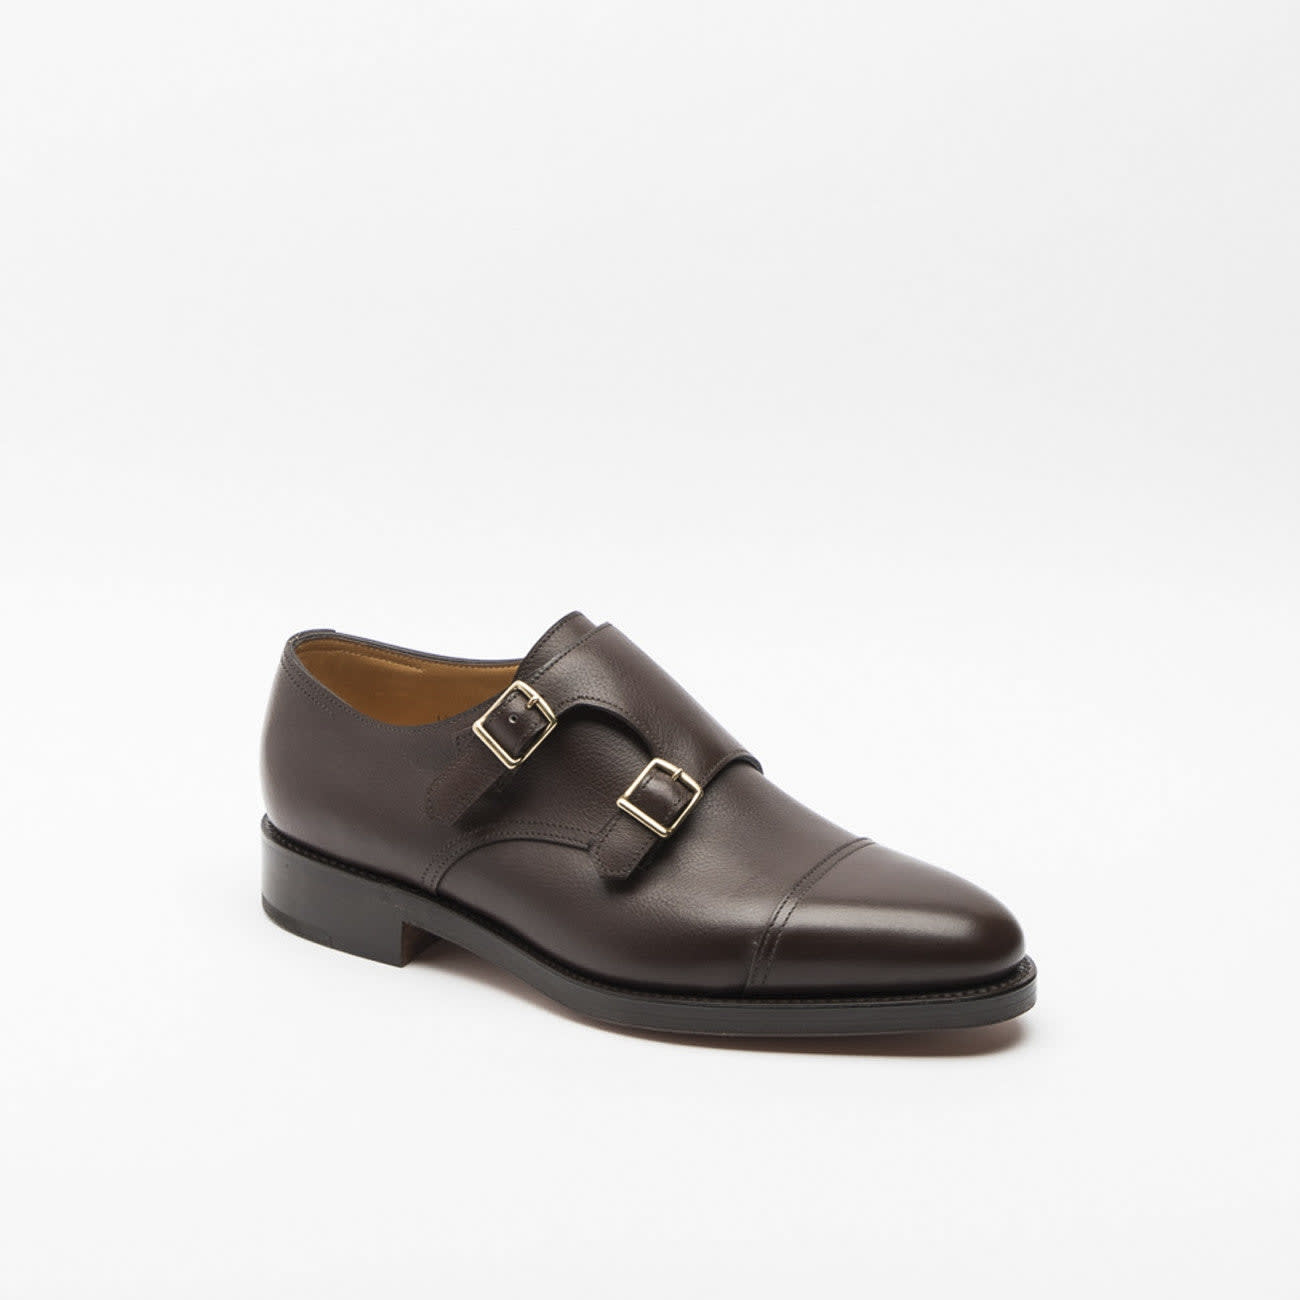 William Shoe In Melize Buffalo With Double Monk Strap